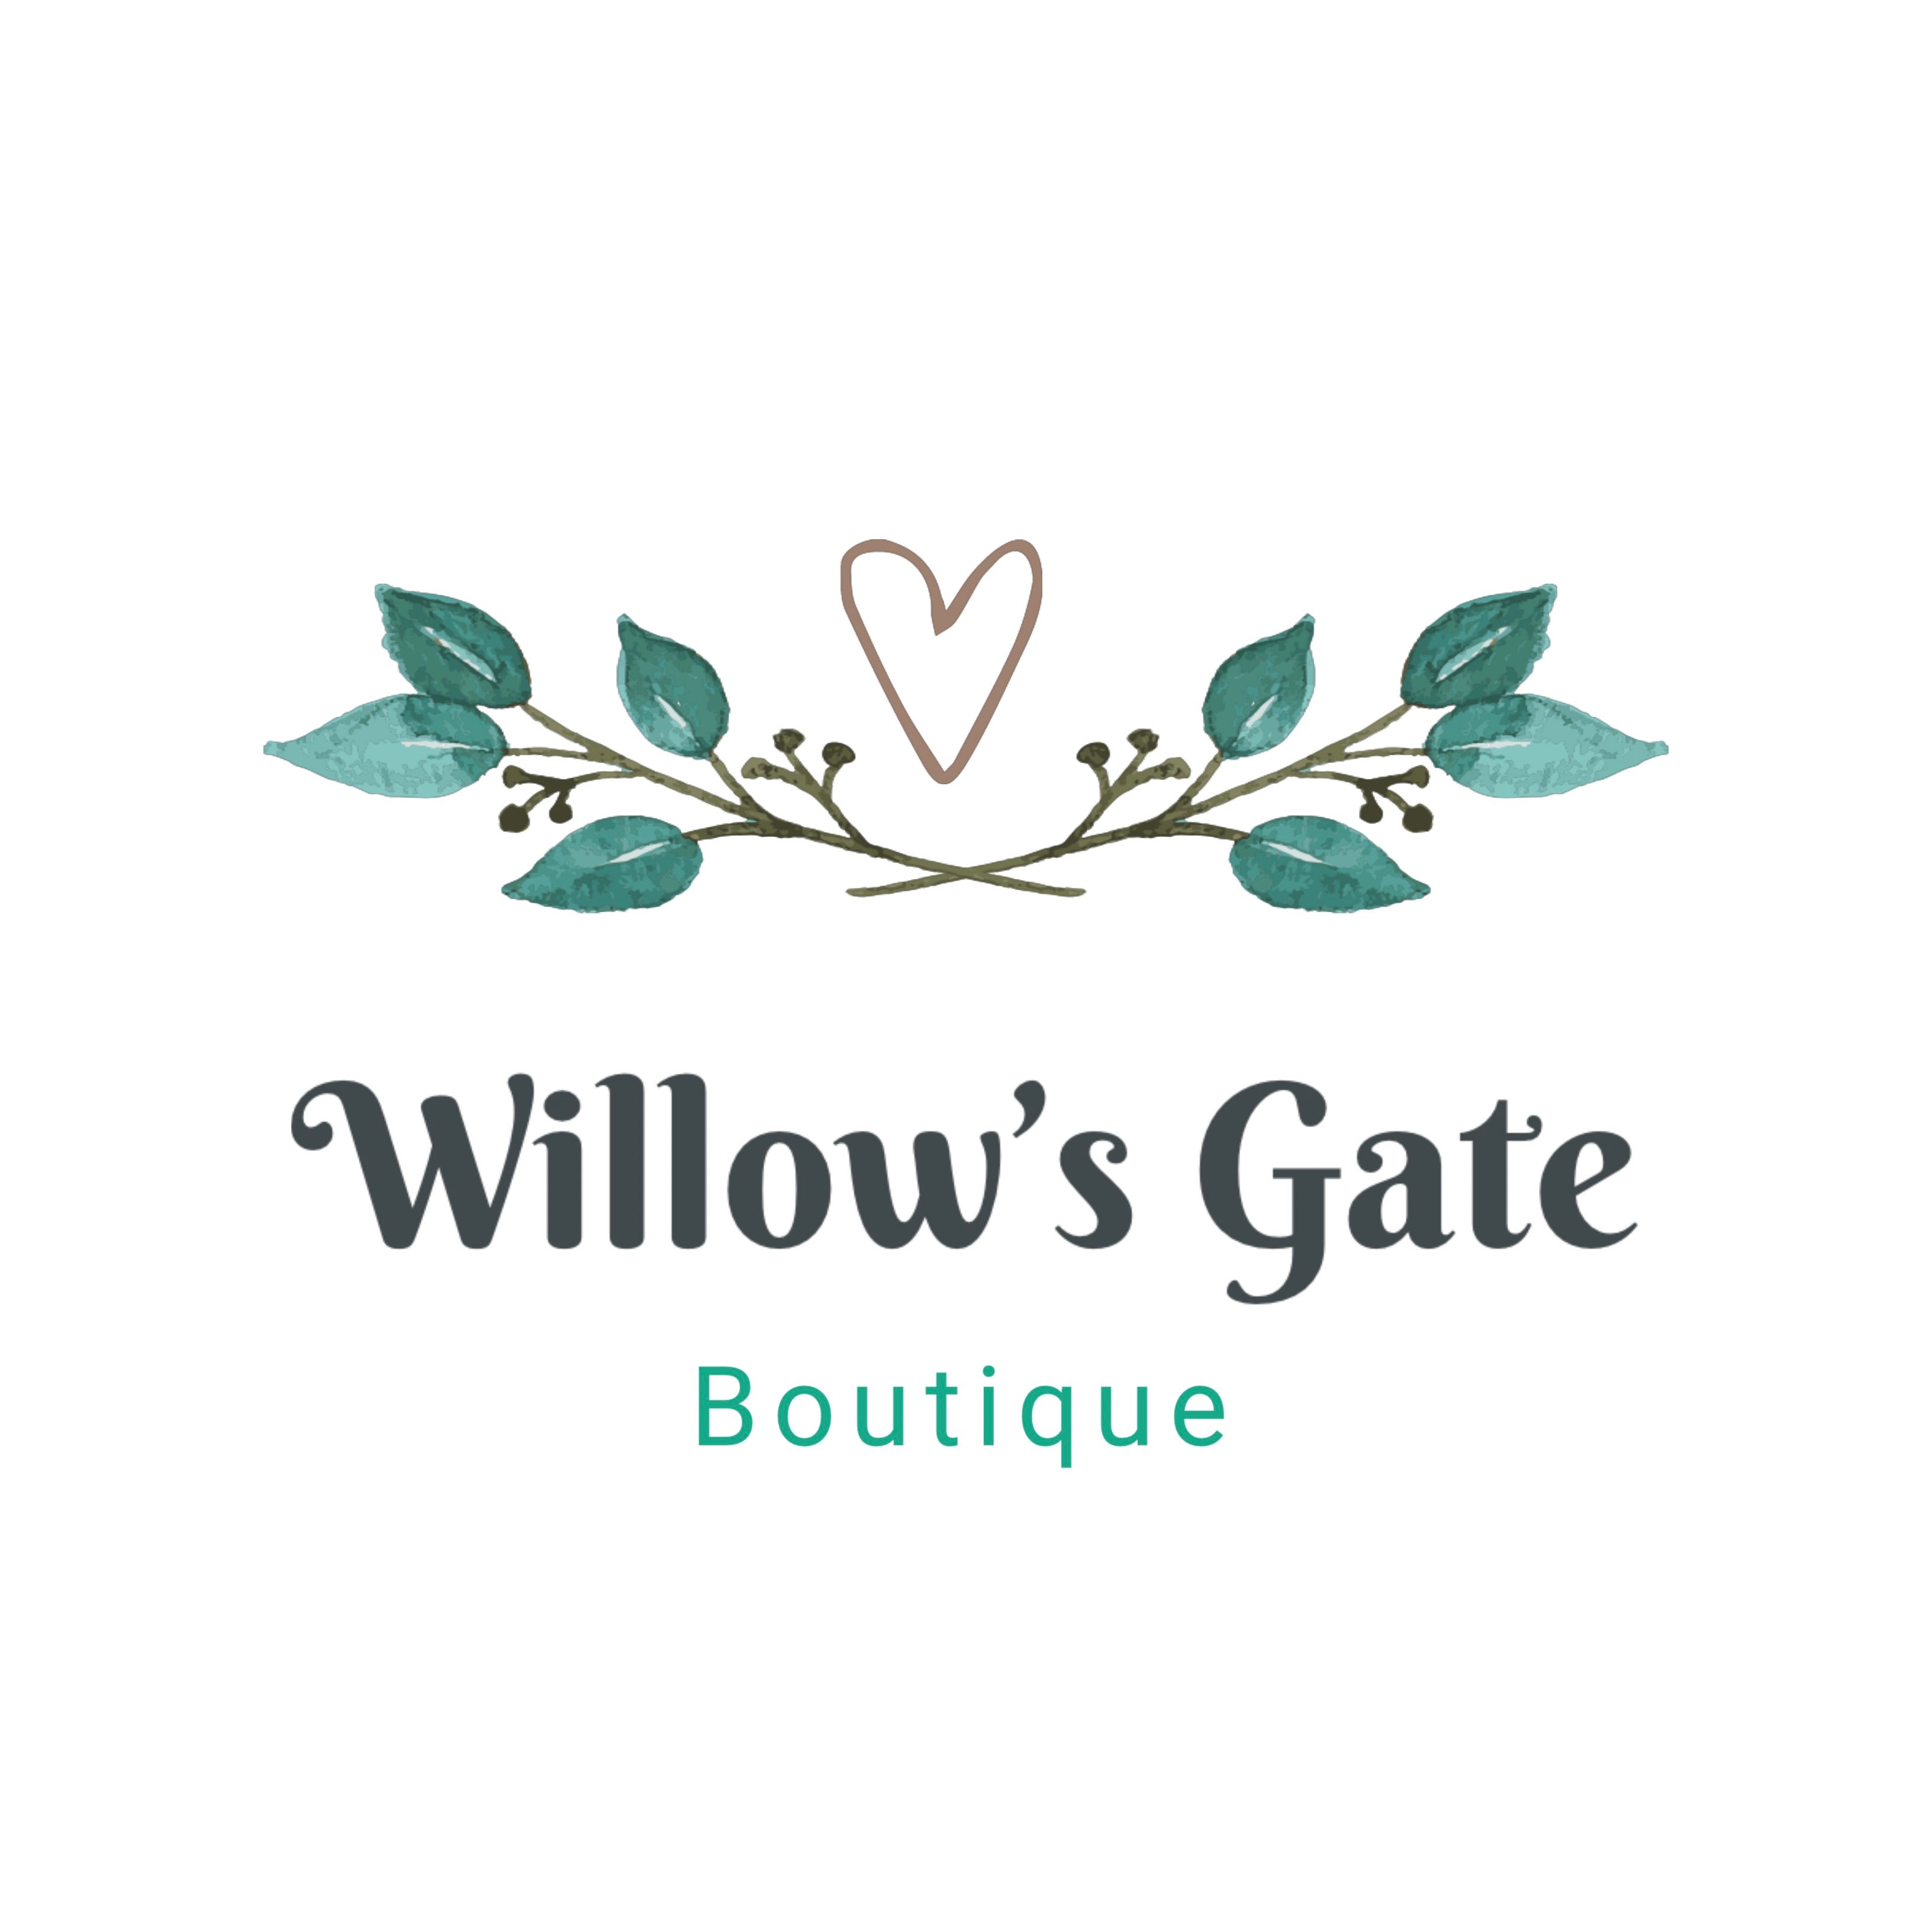 Willow’s Gate Boutique